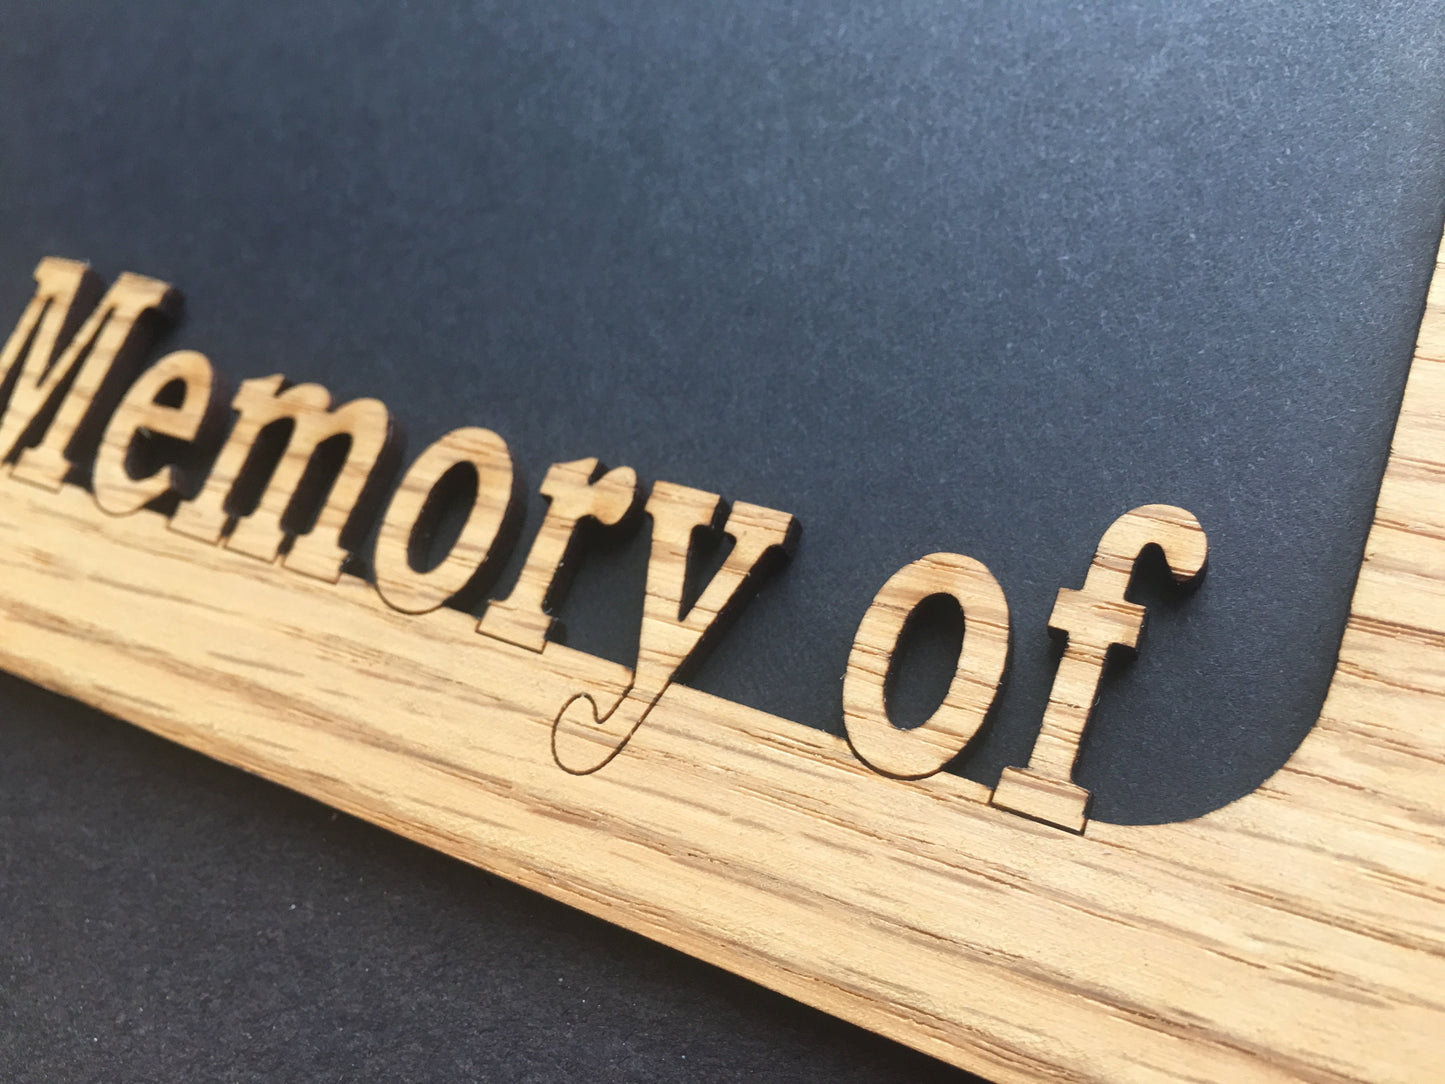 5x7 In Memory Of Picture Frame, Picture Frame, home decor, laser engraved - Legacy Images